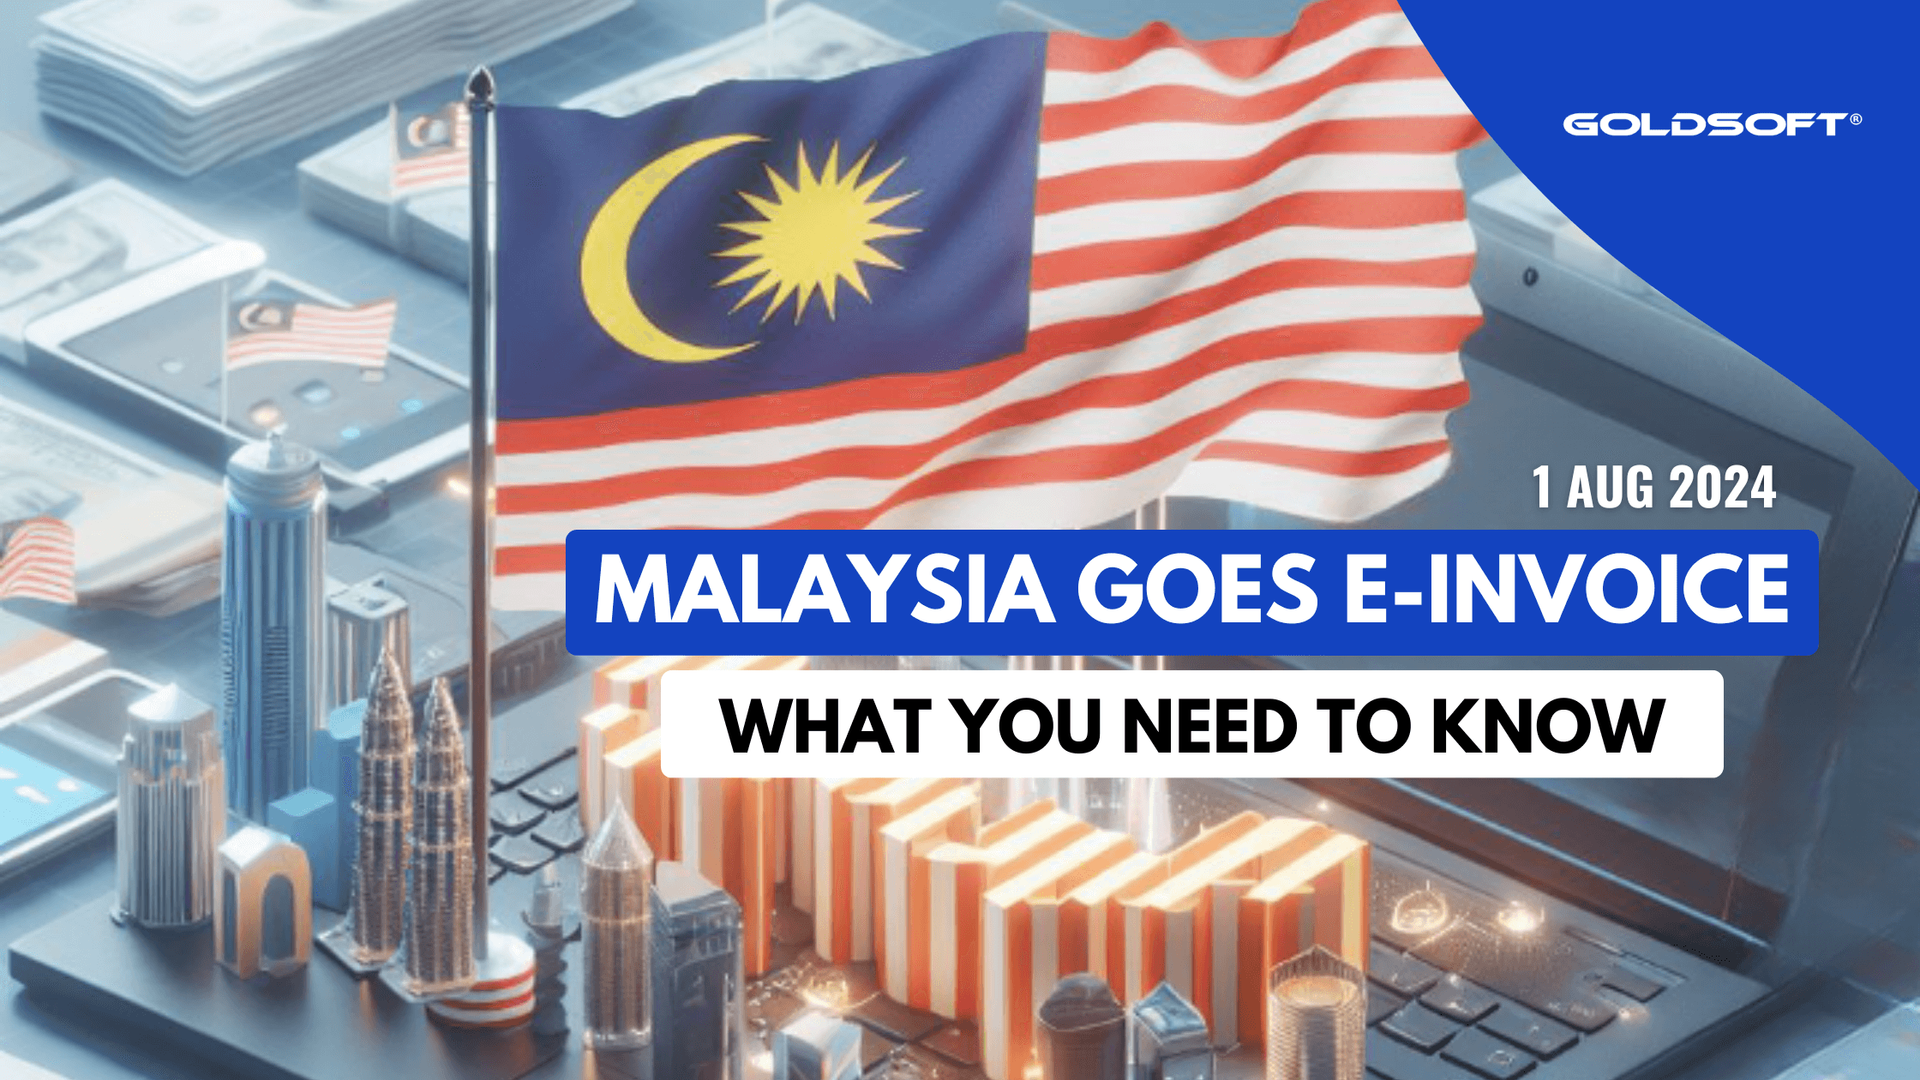 Goldsoft solution stands ready to support Malaysia SMEs' e-invoicing requirements.